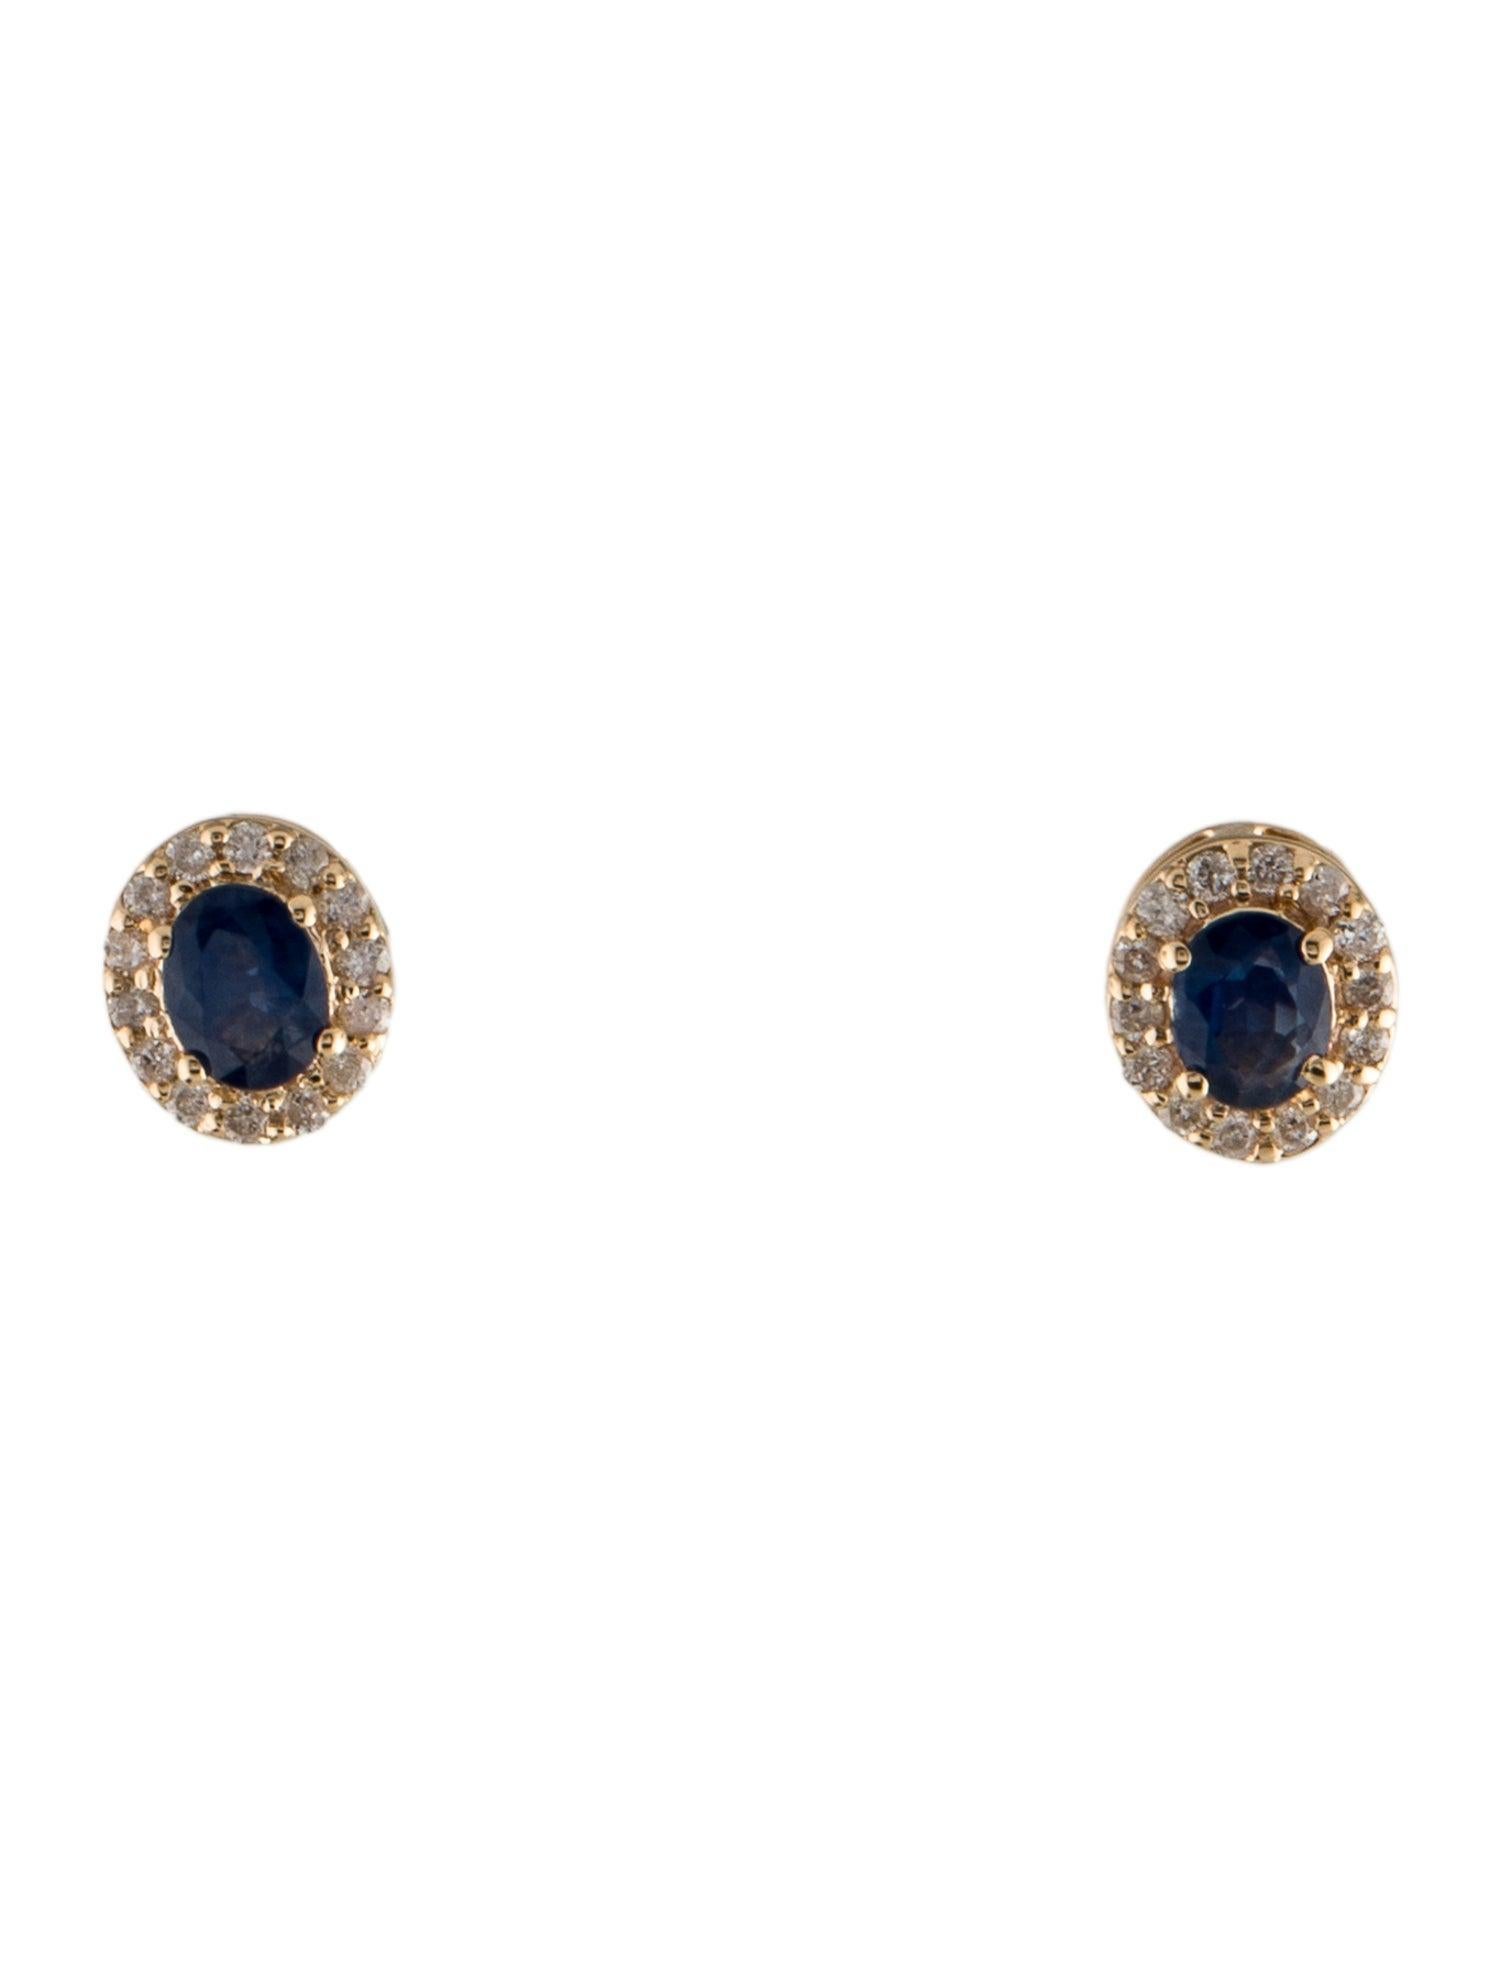 14K Sapphire & Diamond Stud Earrings - Elegant Gemstone Jewelry Timeless Sparkle In New Condition For Sale In Holtsville, NY